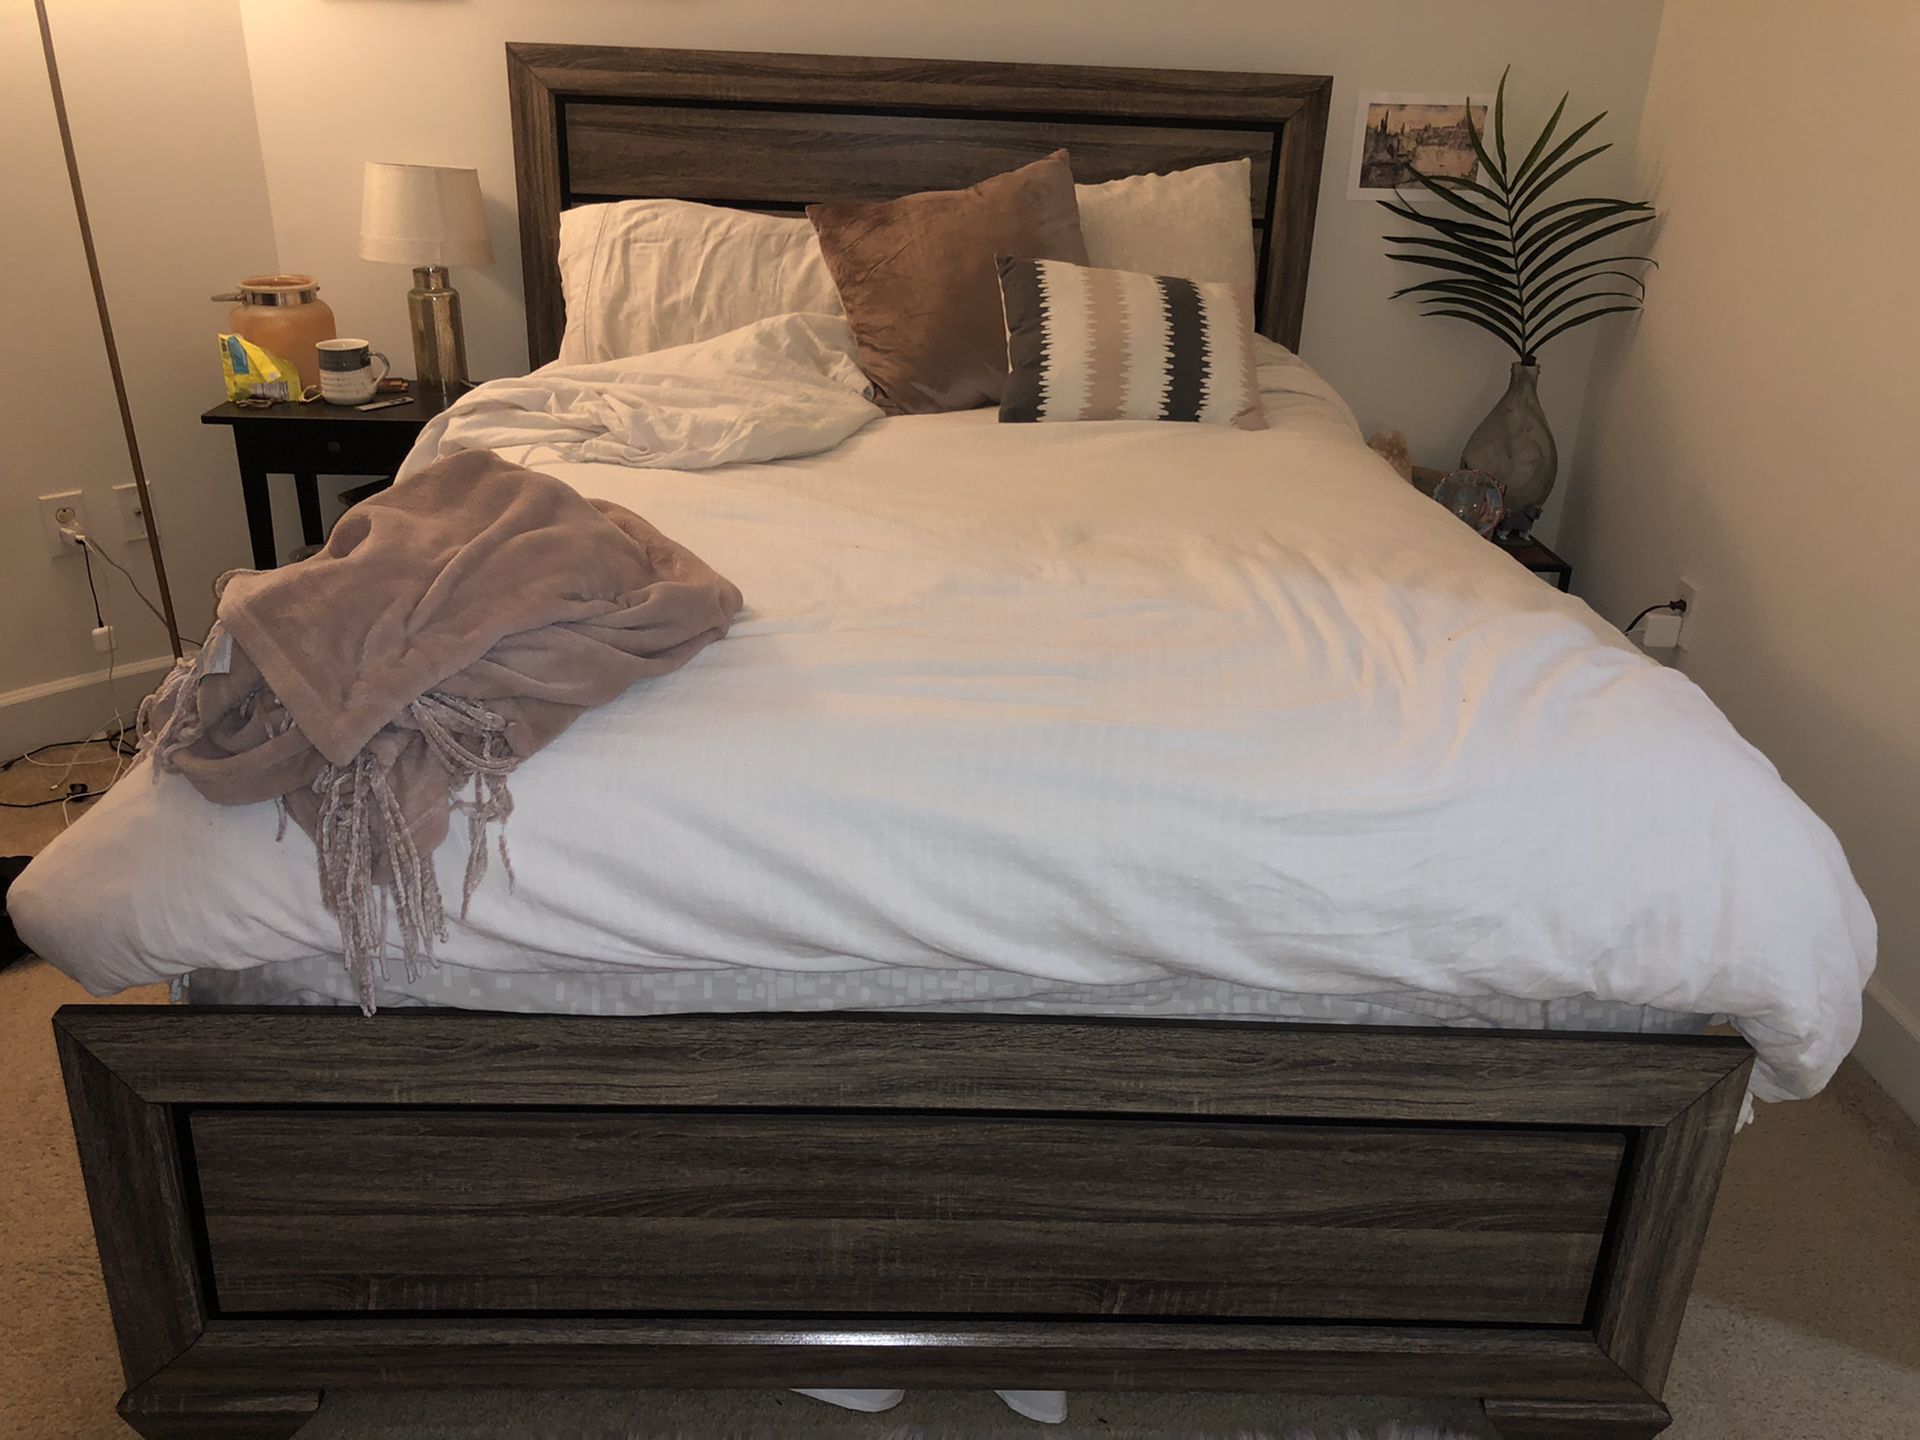 Bed Frame- Great Condition. Queen size. Moving, must go.